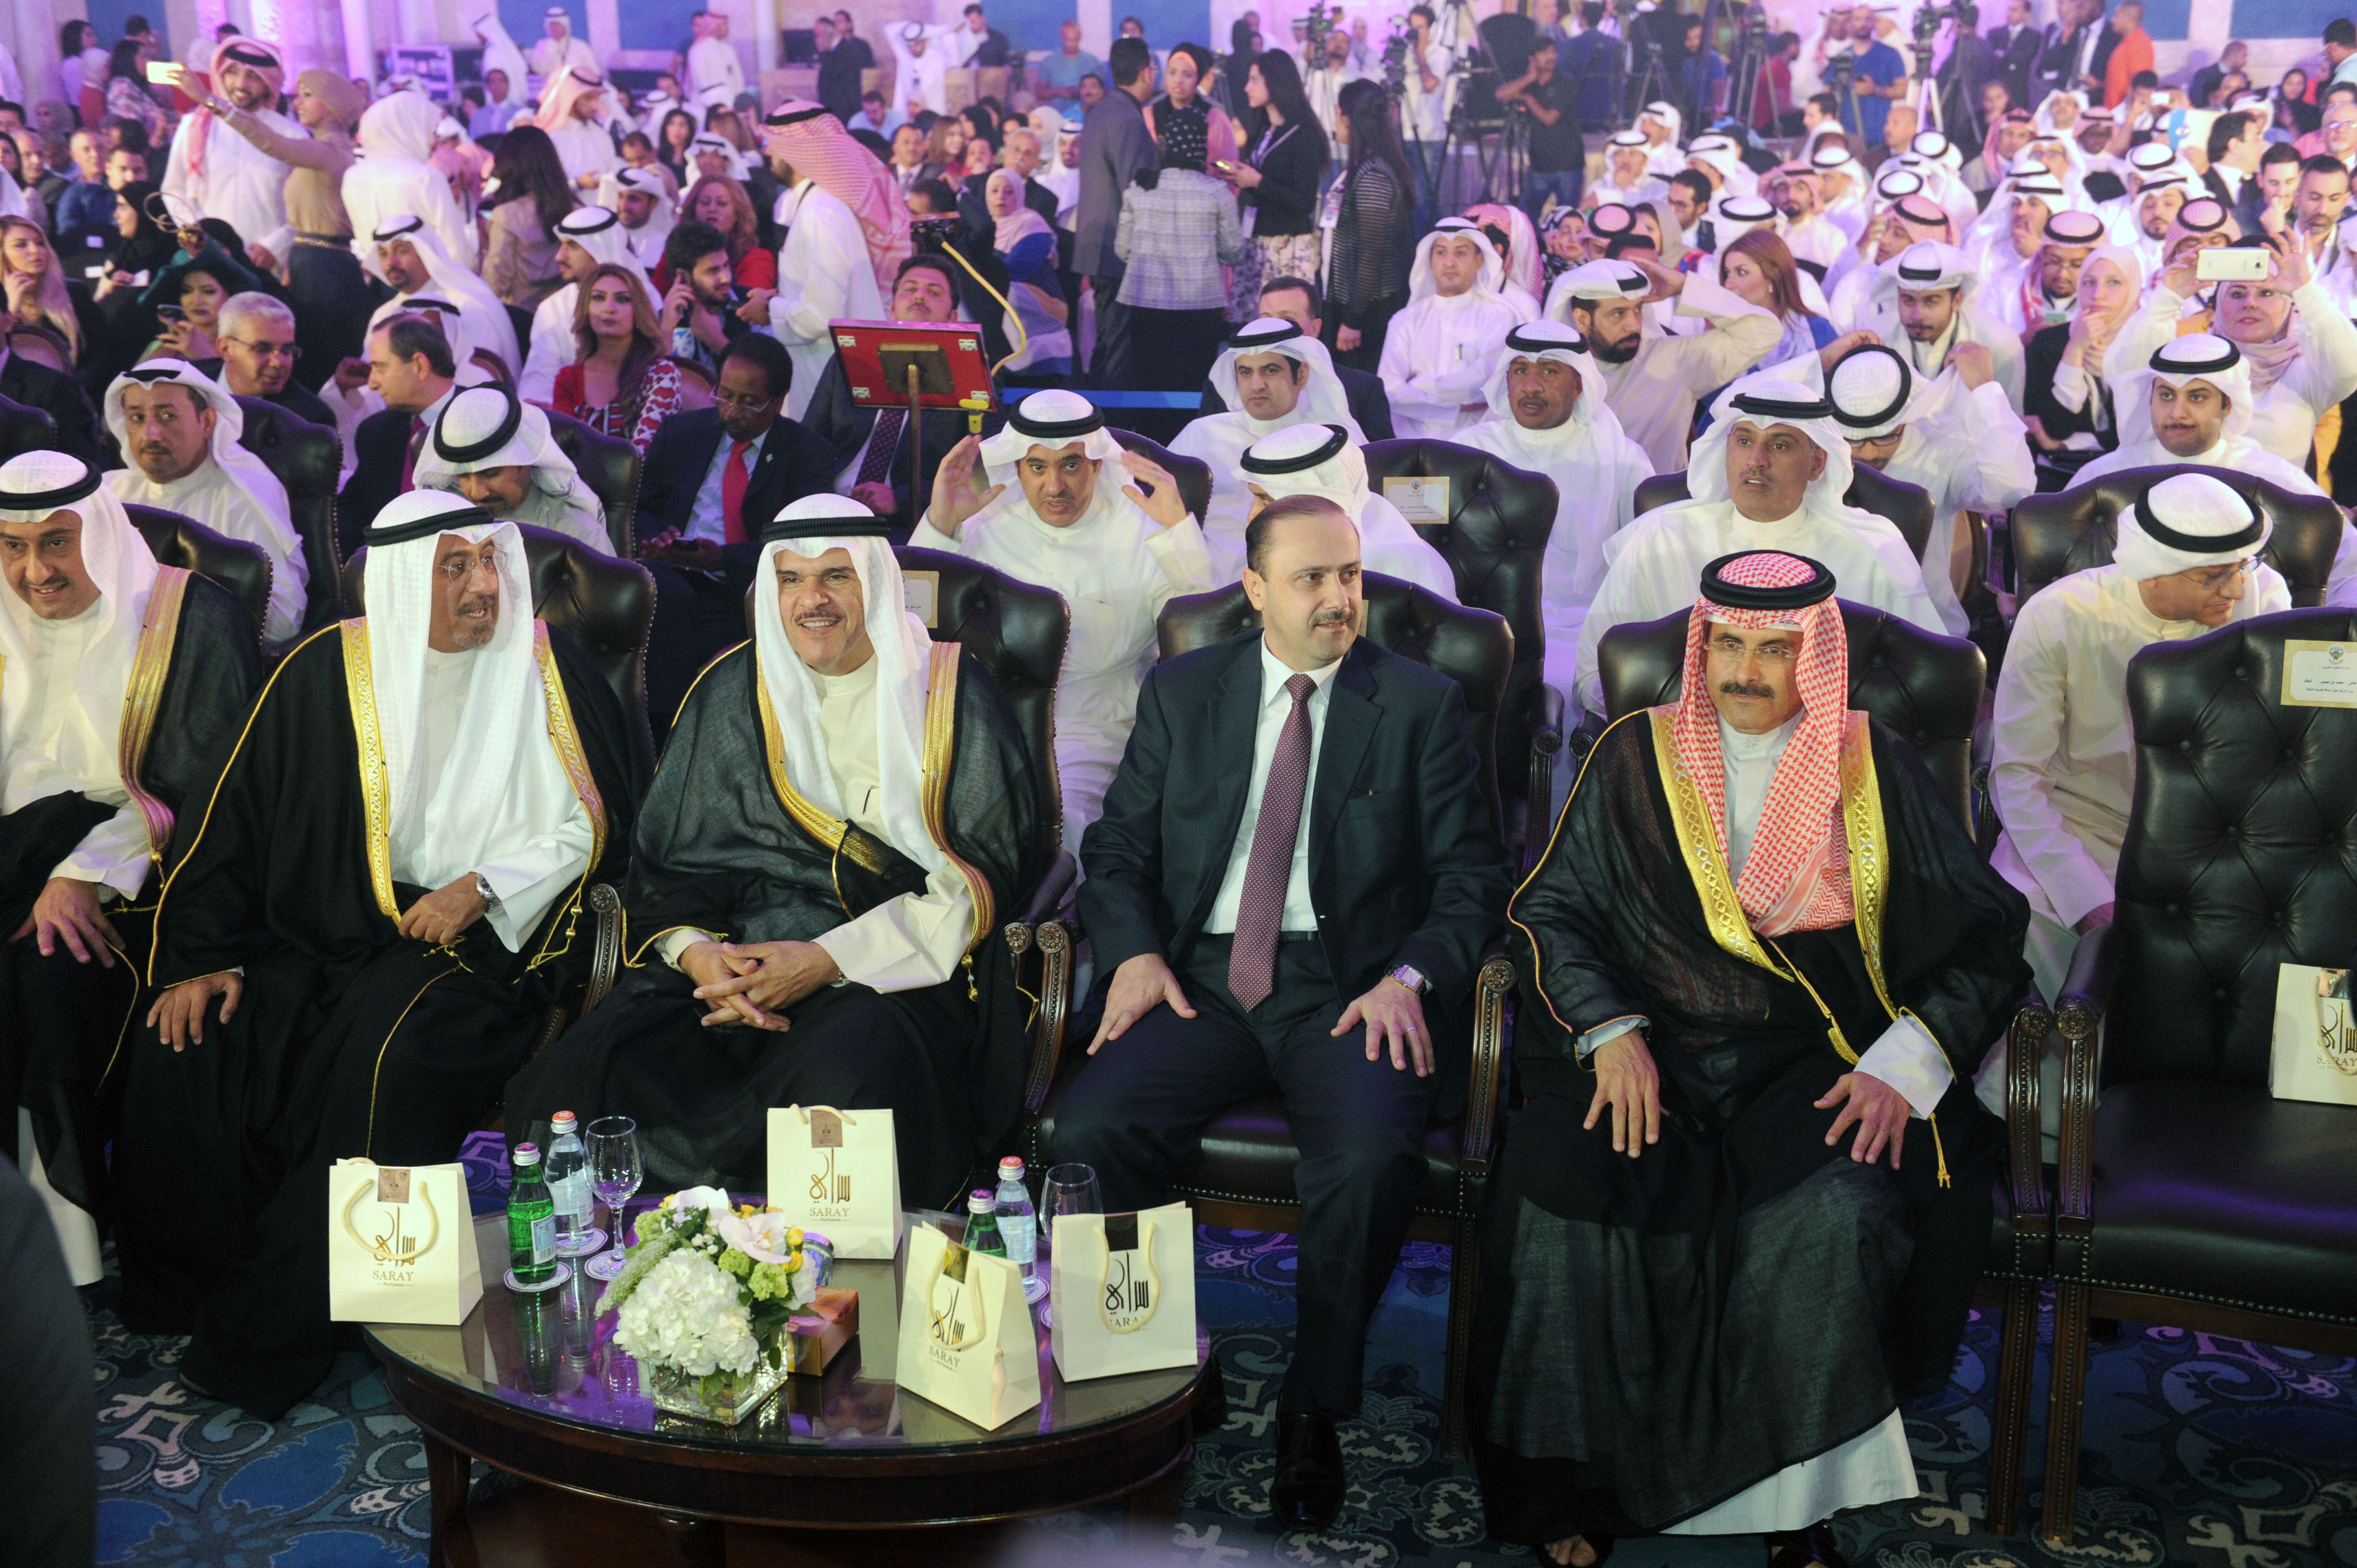 Information Minister Sheikh Salman Al-Sabah and senior guests at the opening of the Arab Media Forum